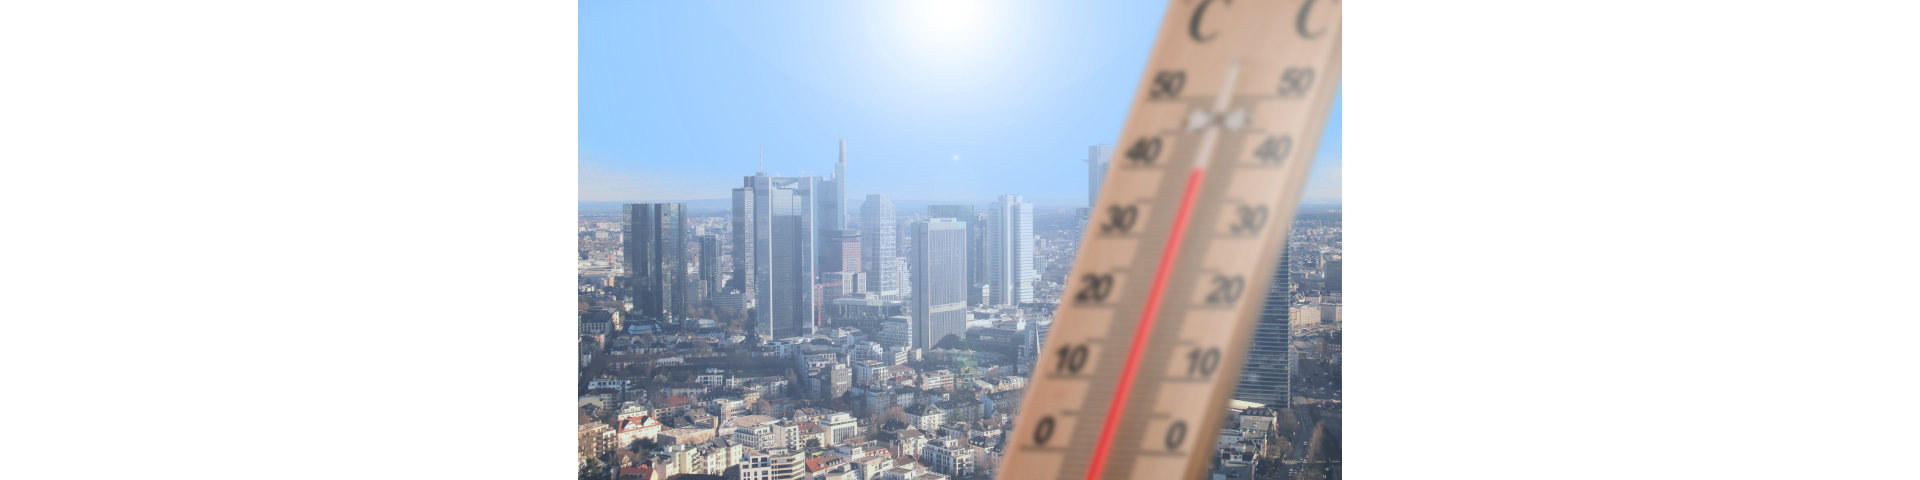 an image of themrometer with scorching sun and some buildings in the background